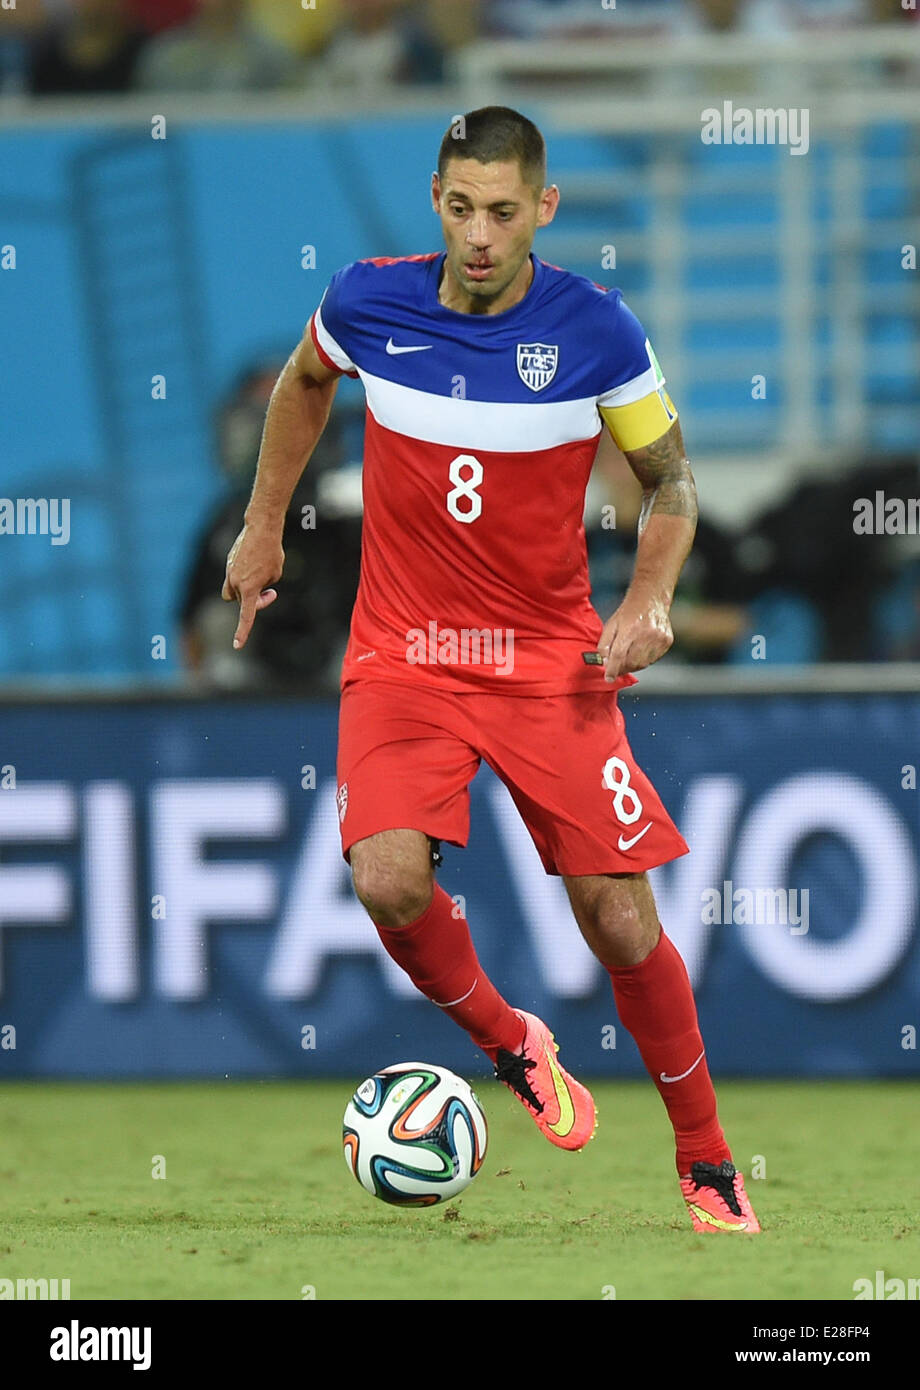 Natal, Brazil. 16th June, 2014. Clint Dempsey of USA in action during the FIFA World Cup 2014 group G preliminary round match between Ghana and the USA at the Estadio Arena das Dunas Stadium in Natal, Brazil, 16 June 2014. Credit:  dpa picture alliance/Alamy Live News Stock Photo